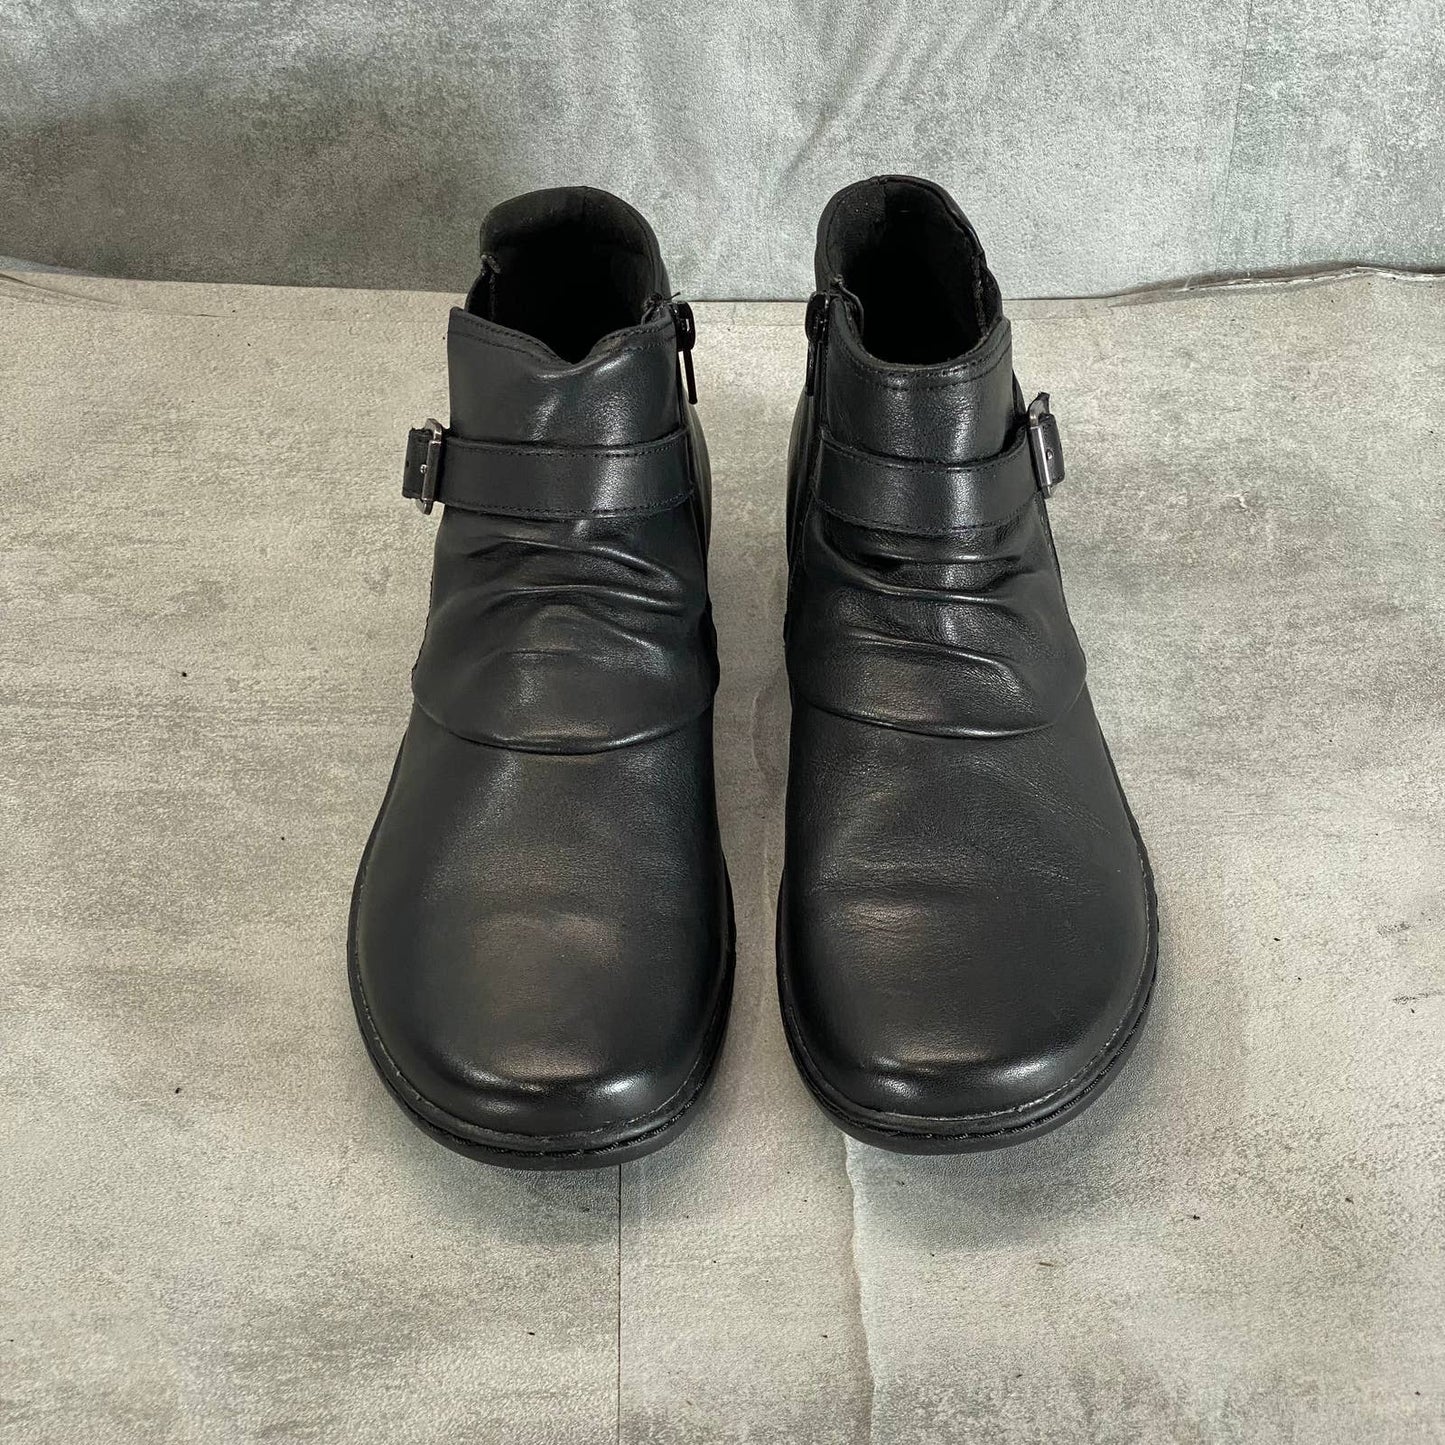 CLARKS COLLECTION Women's Black Leather Cora Ruched Ankle Boots SZ 10